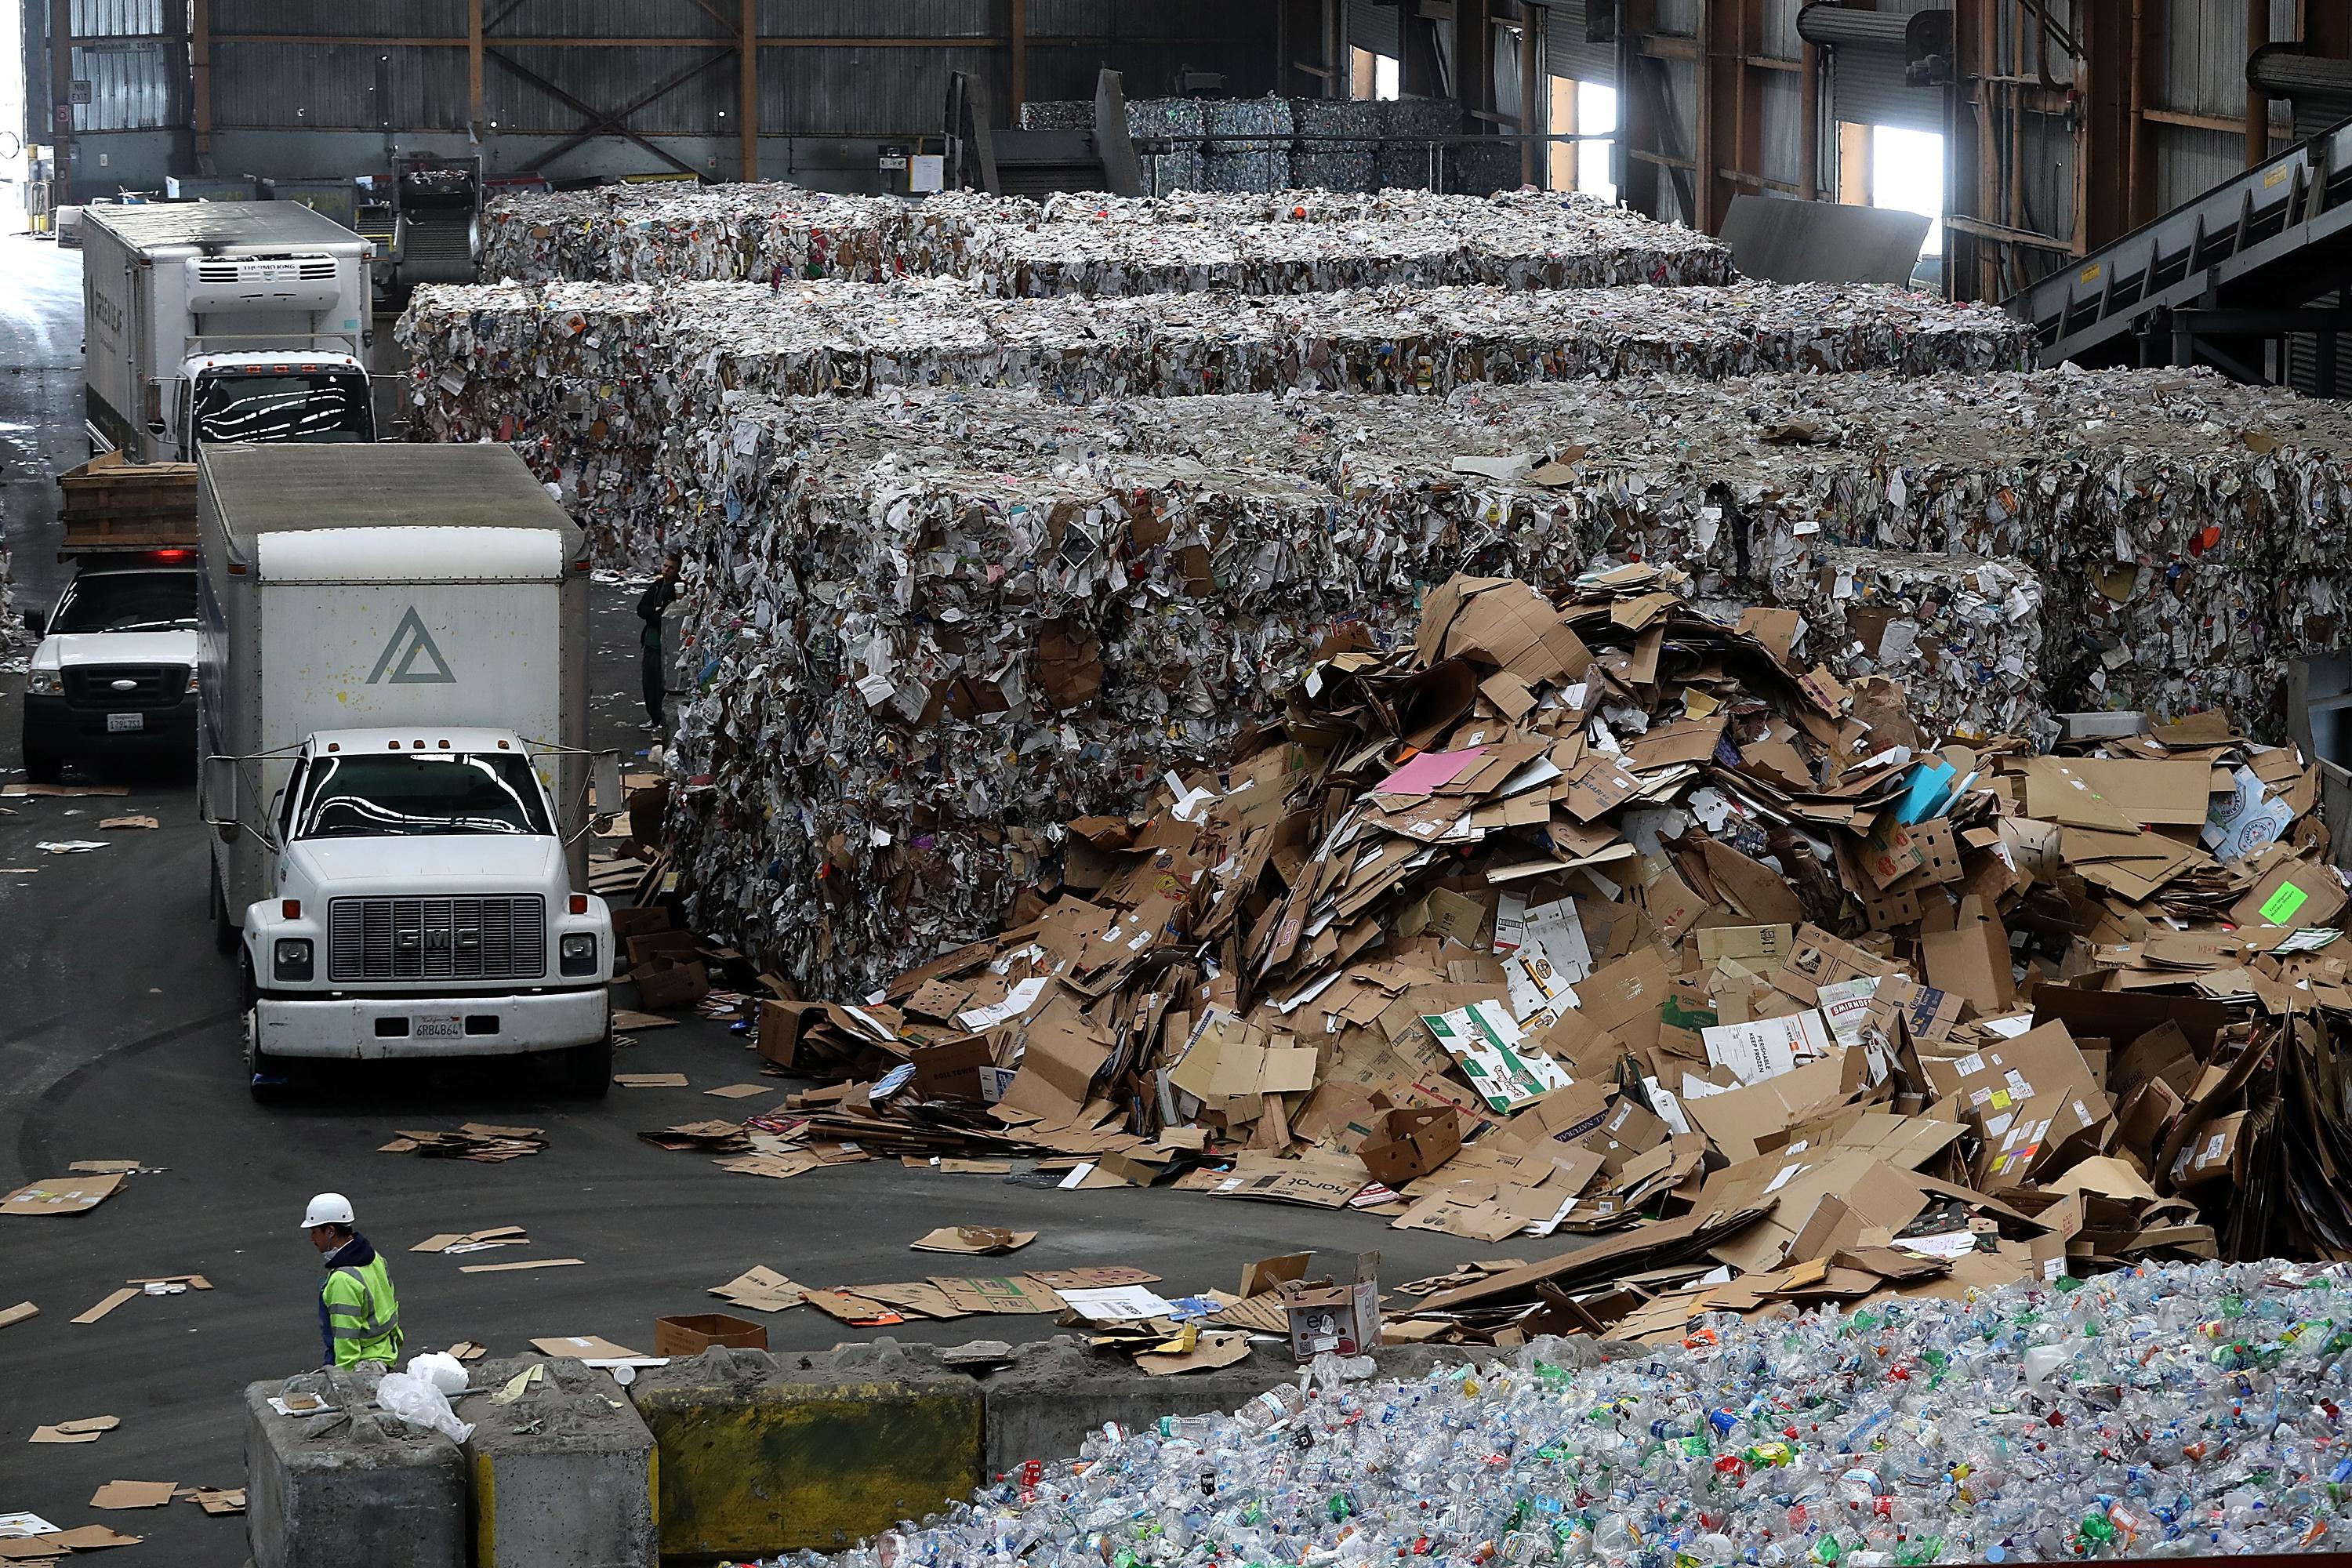 Piles and bales of recyclable cardboard inside a giant warehouse